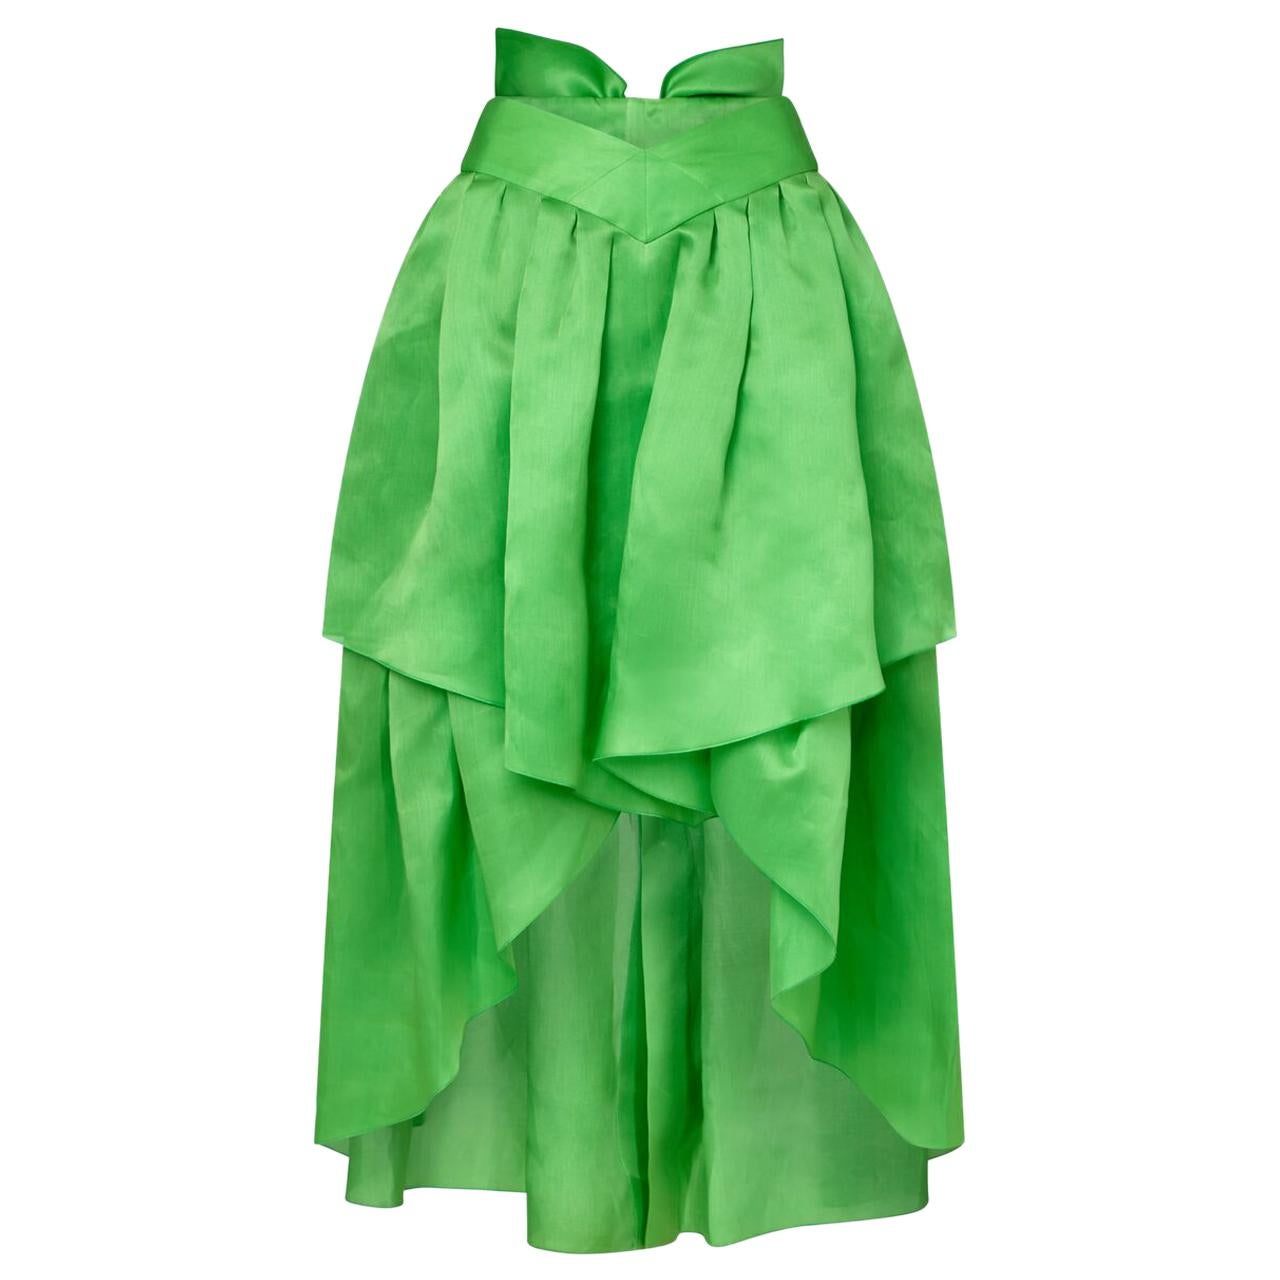 Chanel 1980s Emerald Green Silk Organza Skirt With Bow Detail